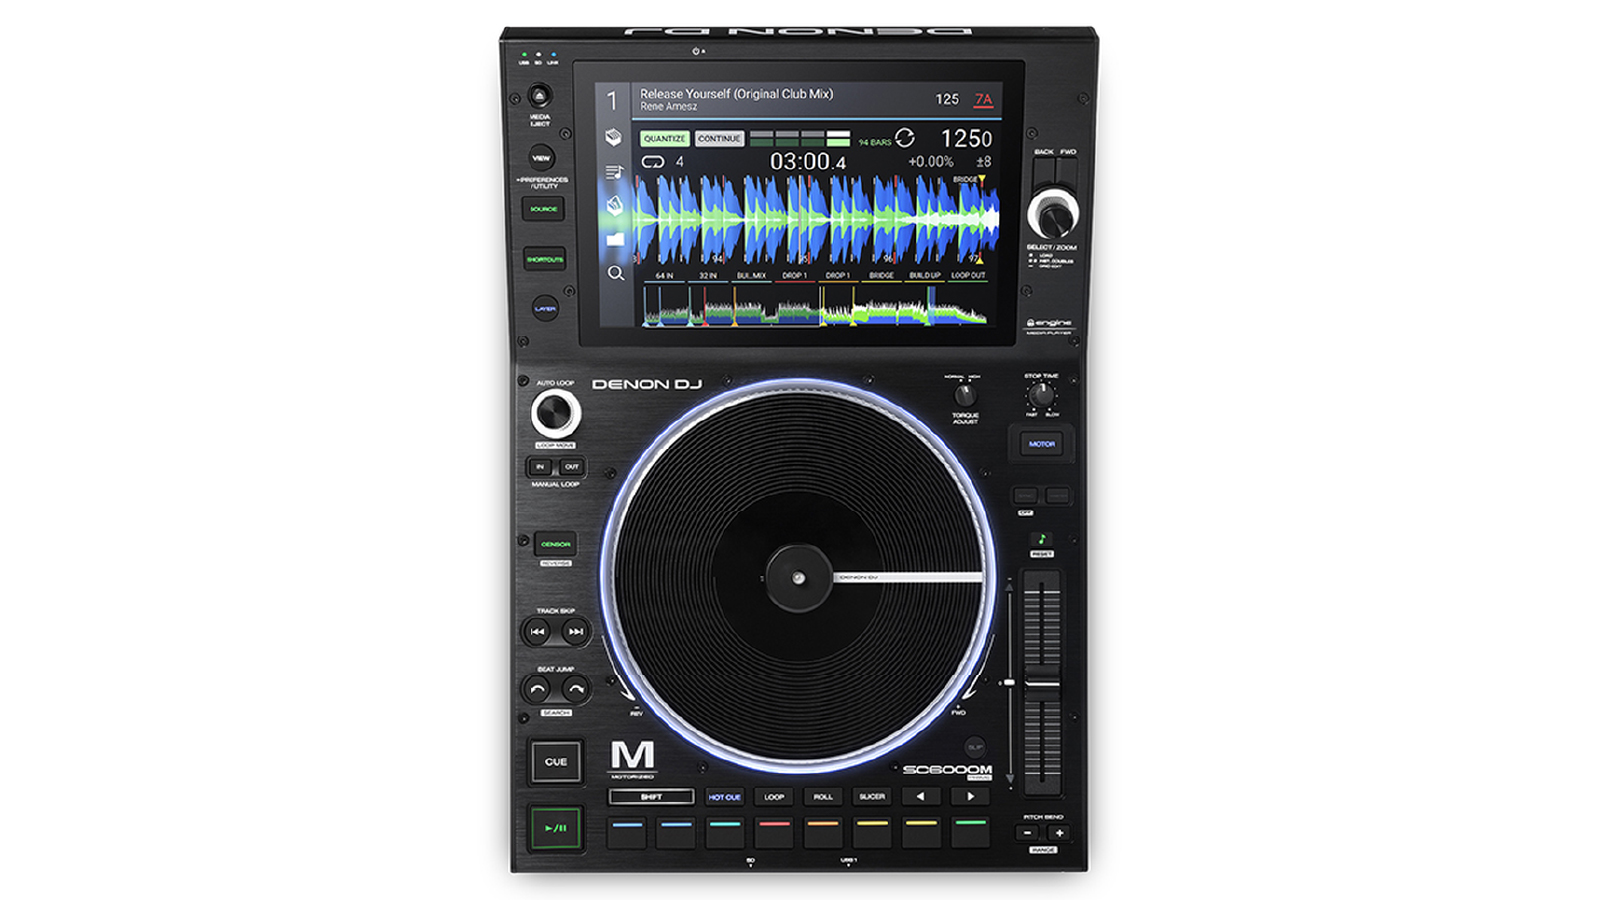 Professional DJ Media Player with 7" Multi-Touch Display